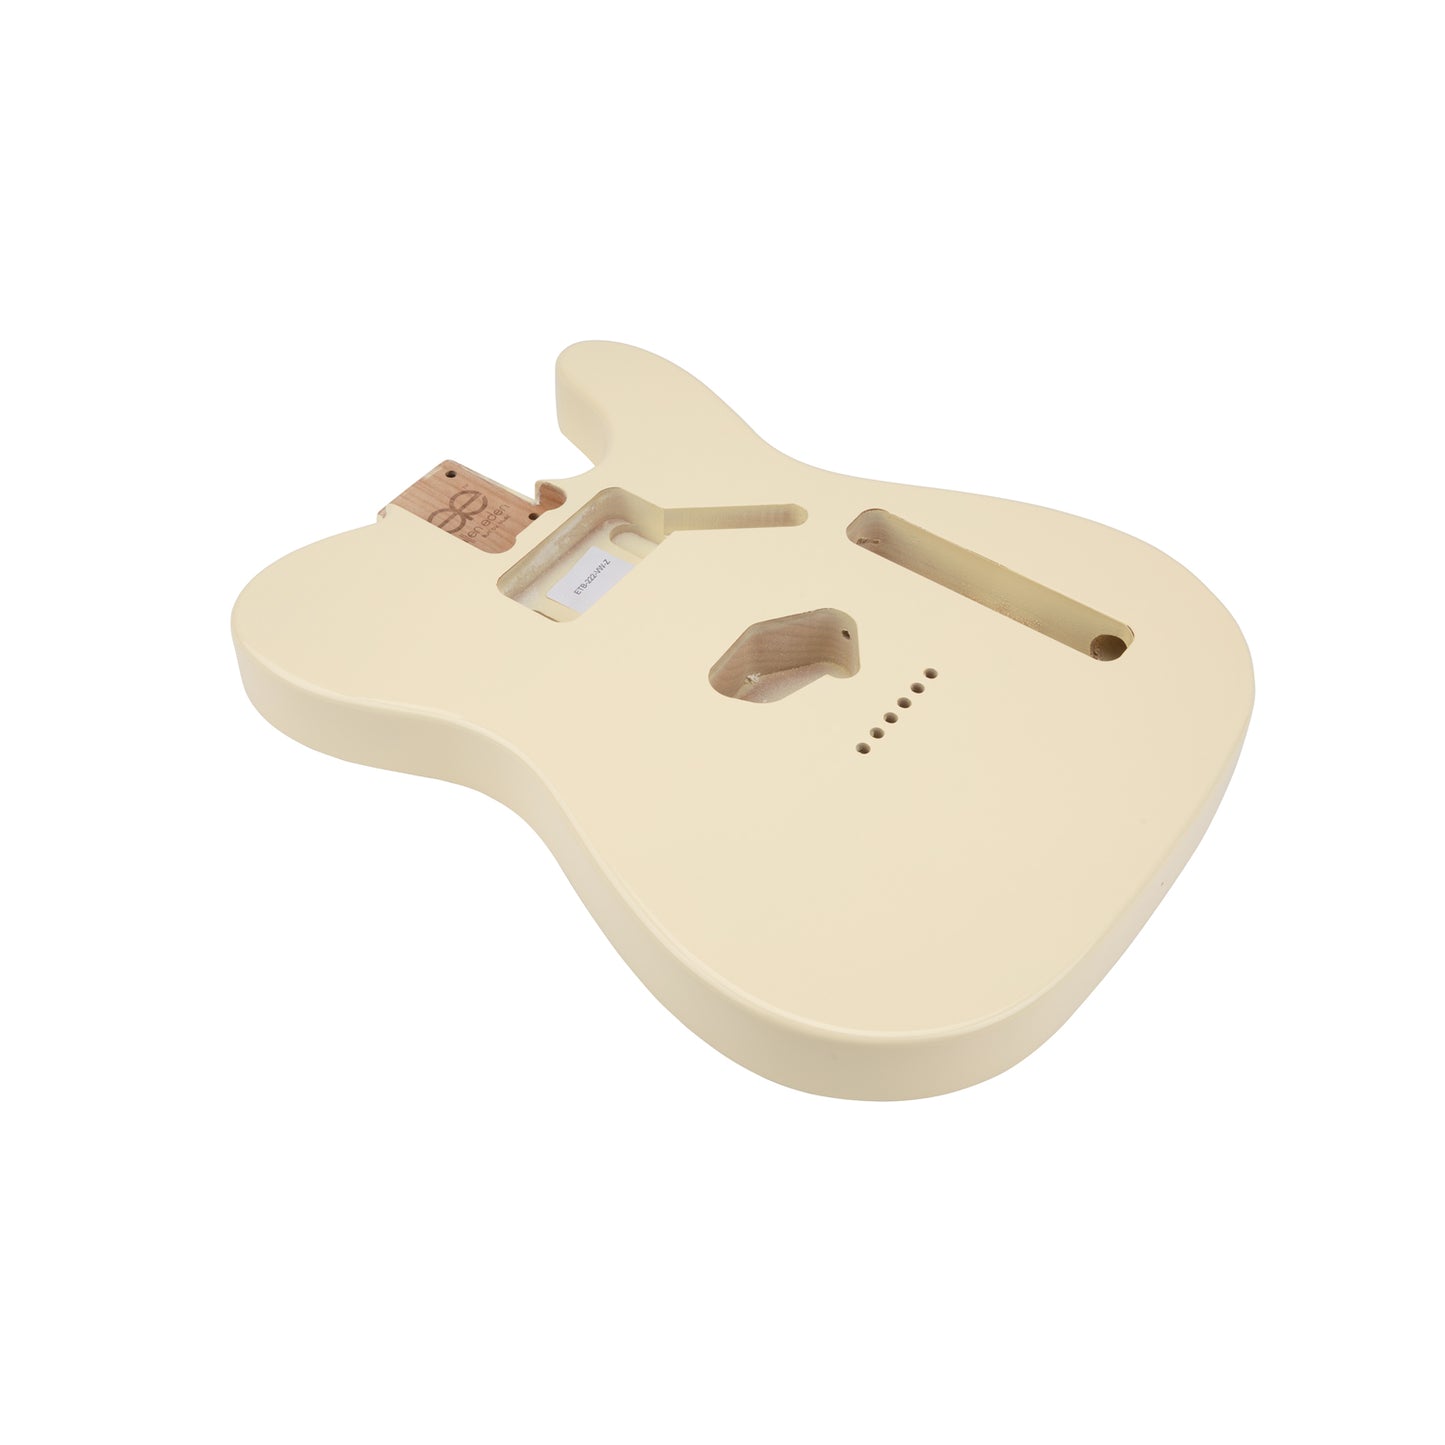 AE Guitars® T-Style Alder Replacement Guitar Body Vintage White